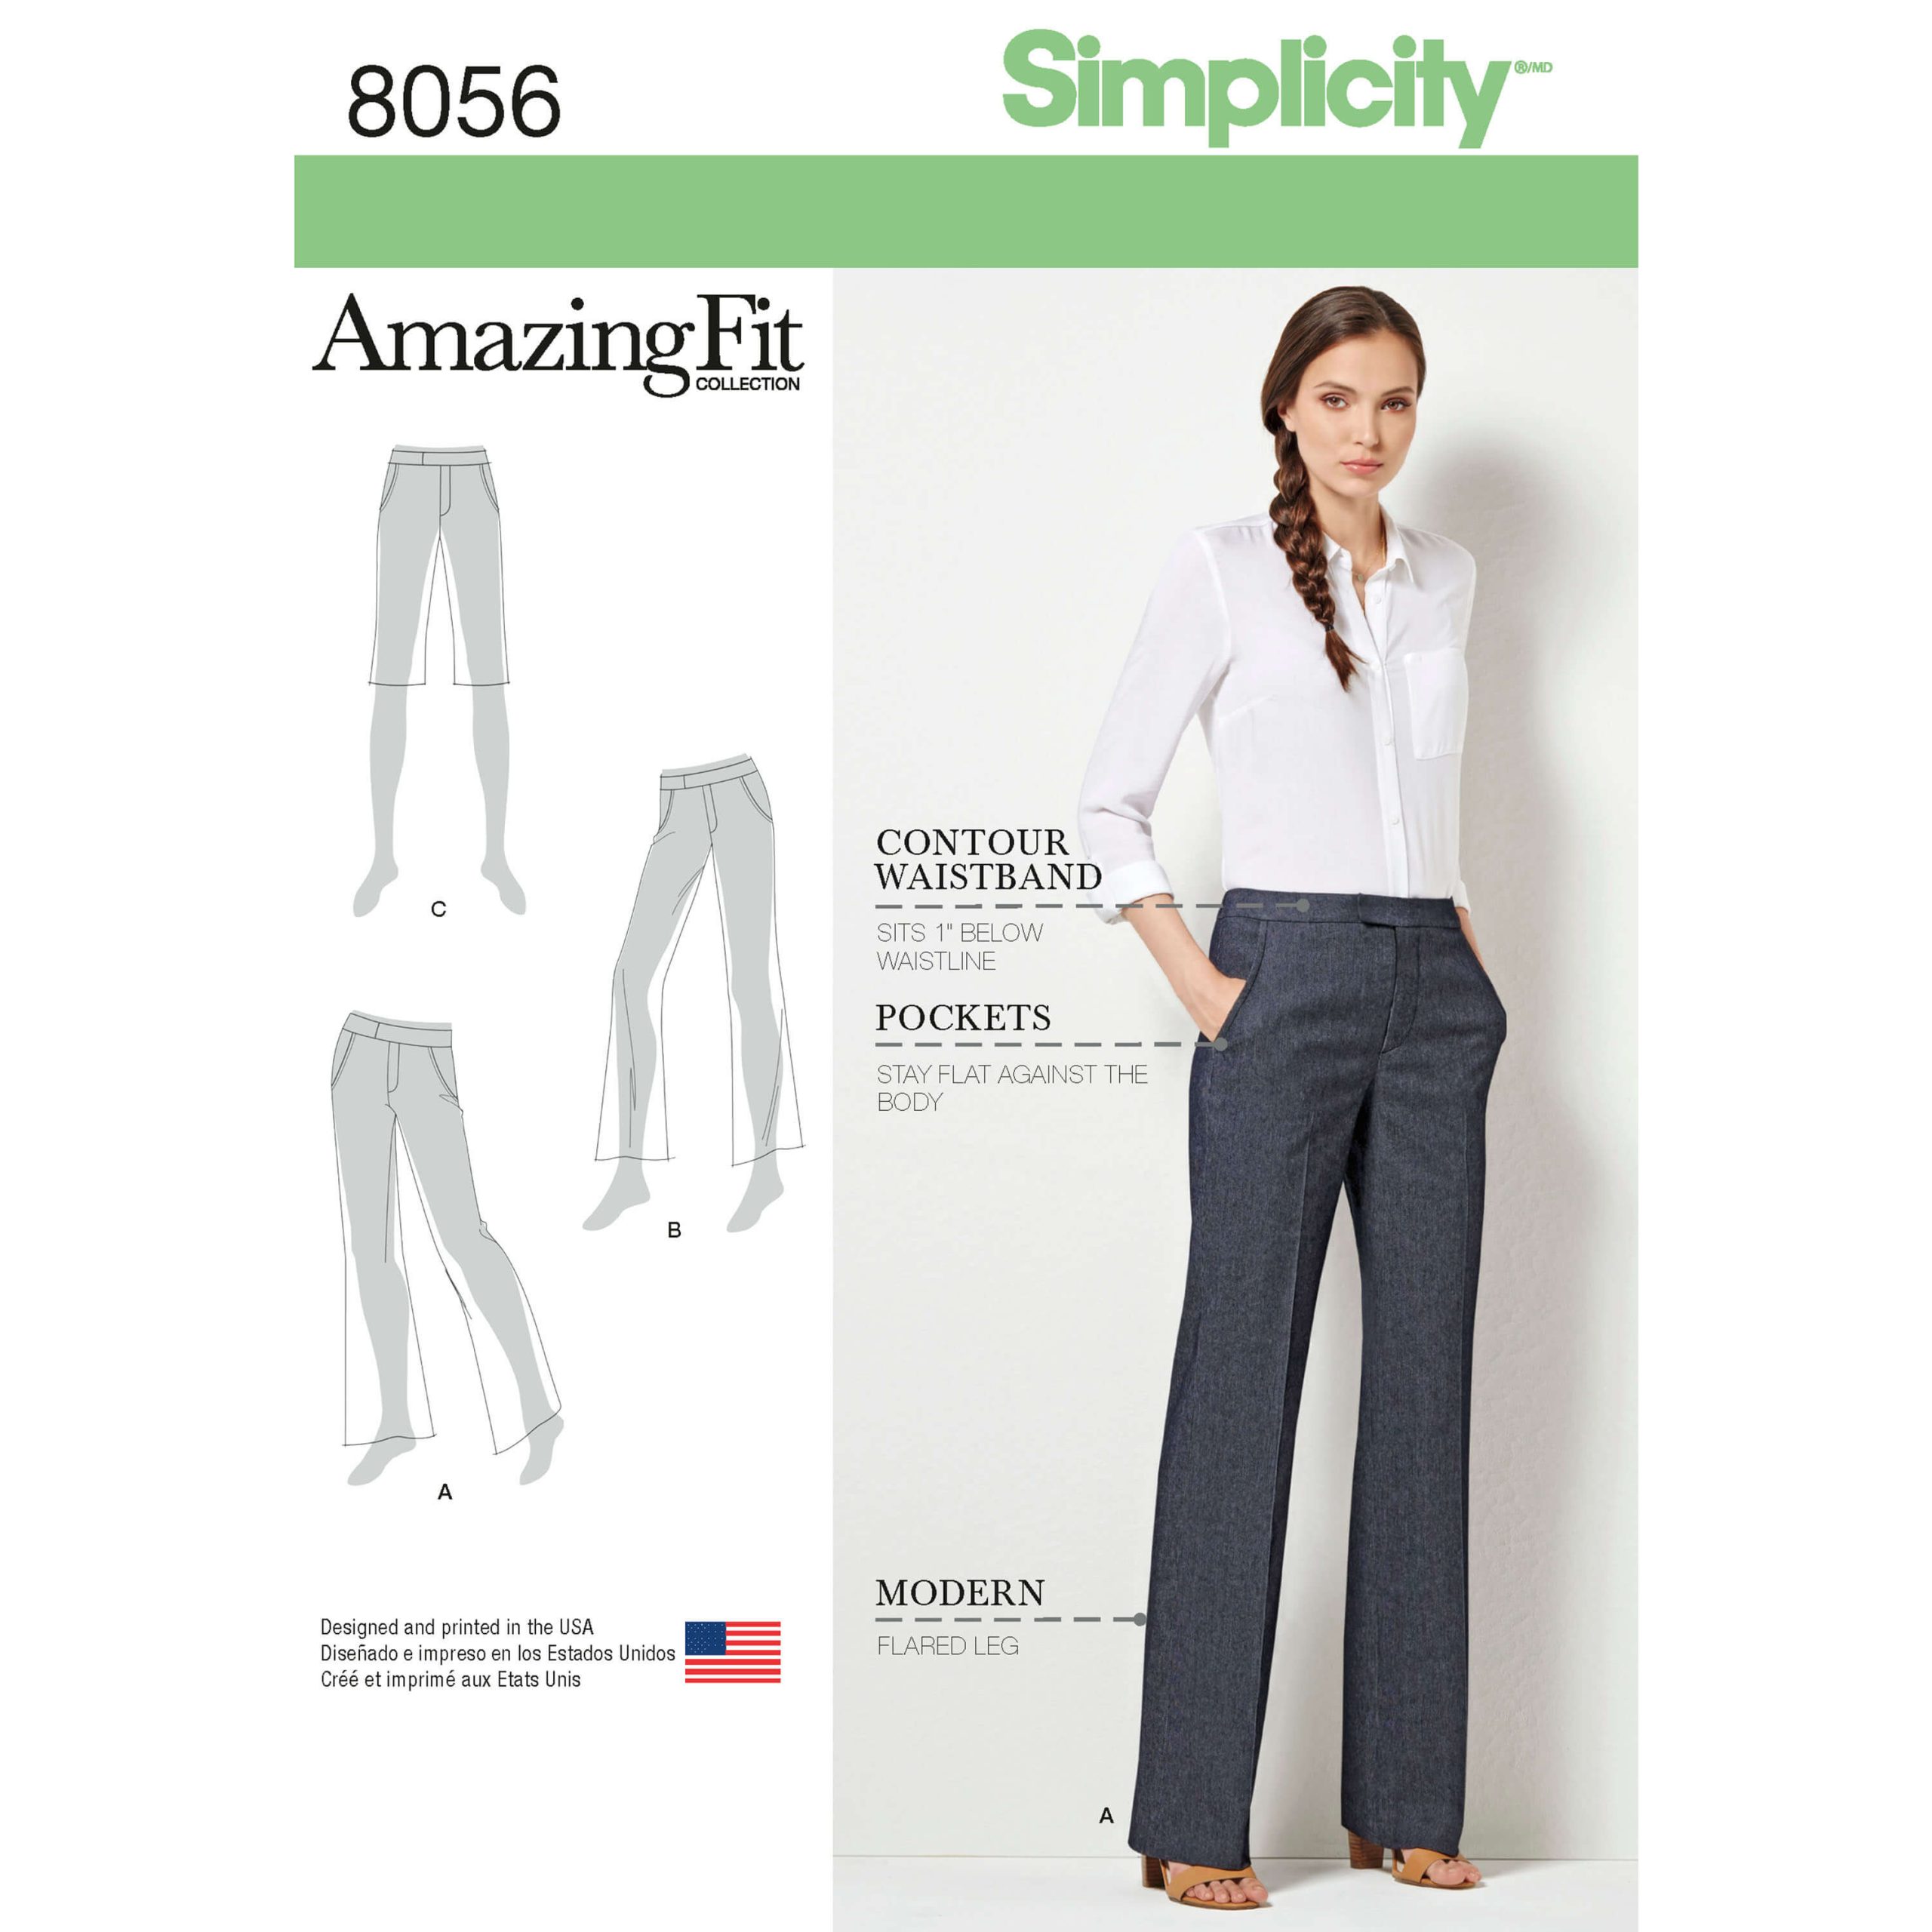 Simplicity Sewing Pattern 8056 Amazing Fit Miss and Plus Size Flared Trousers or Shorts